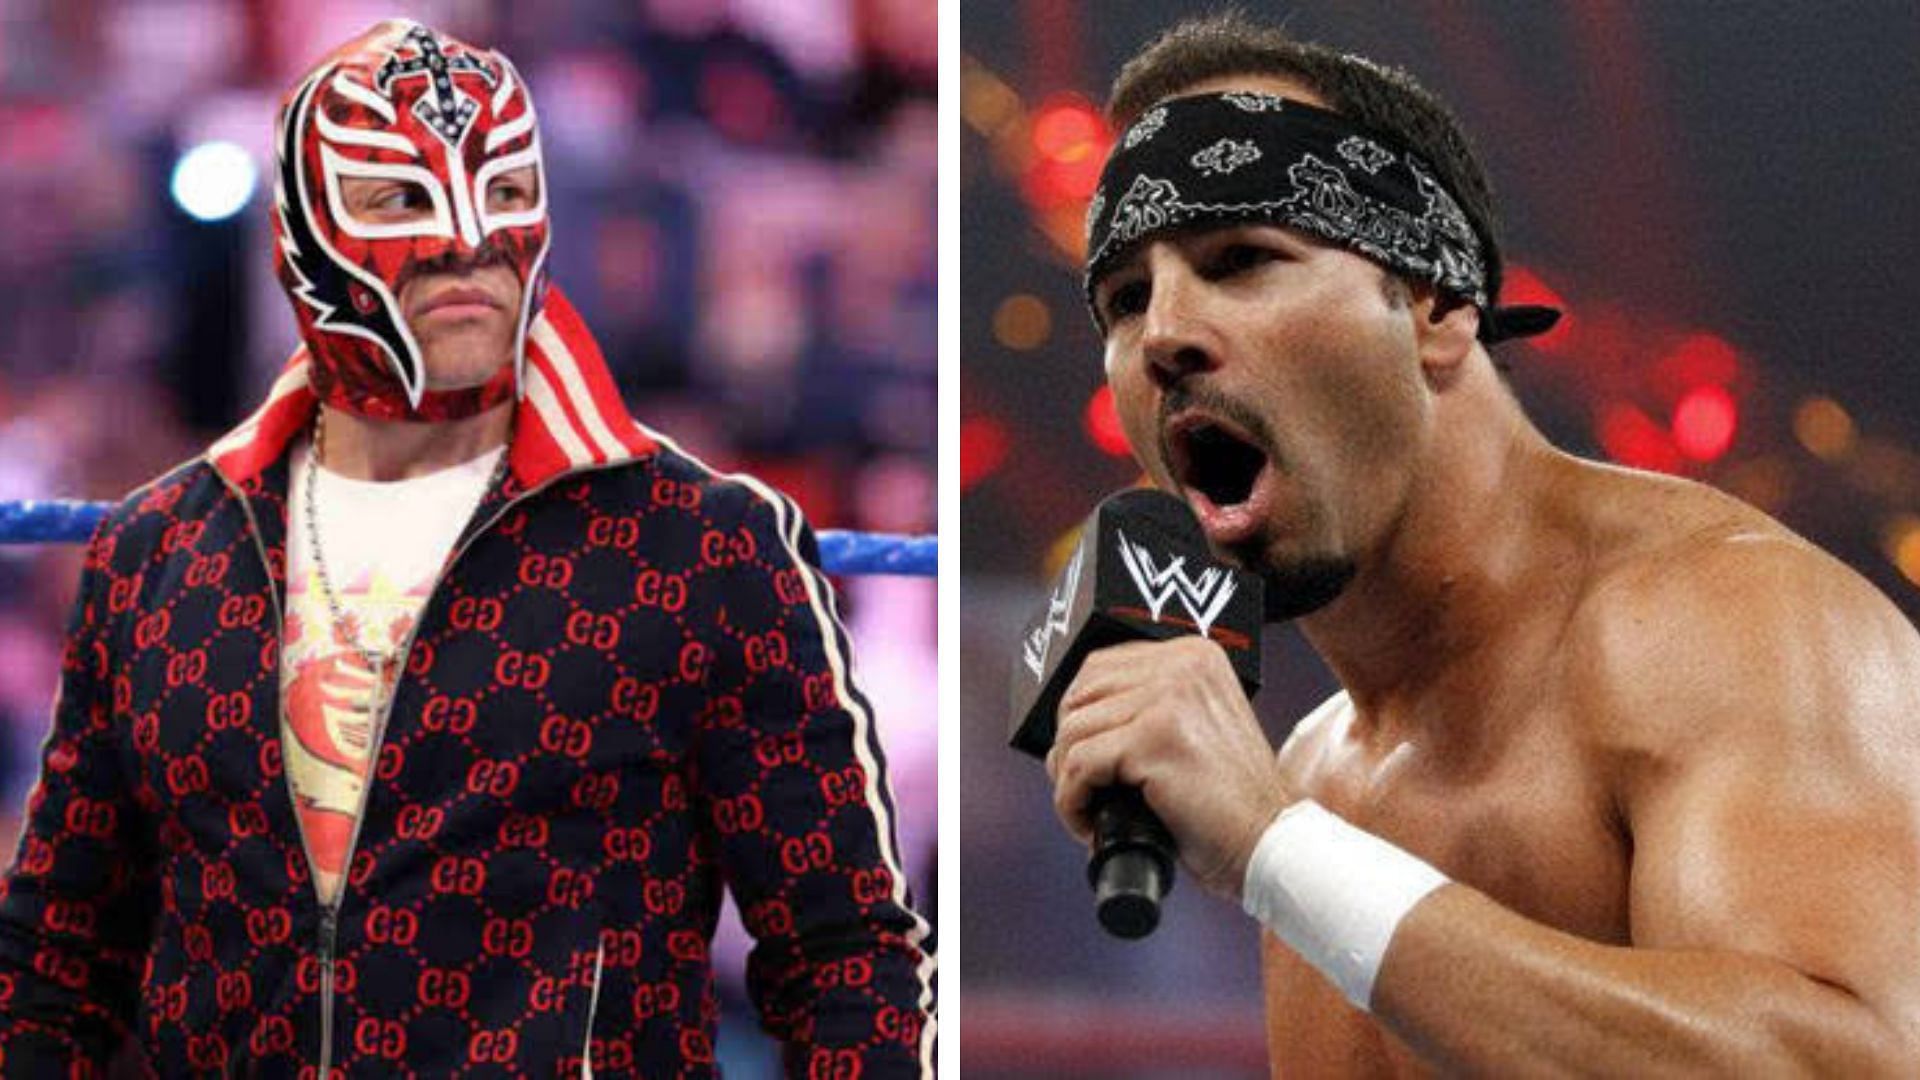 Chavo Guerrero lashed out at Rey Mysterio earlier